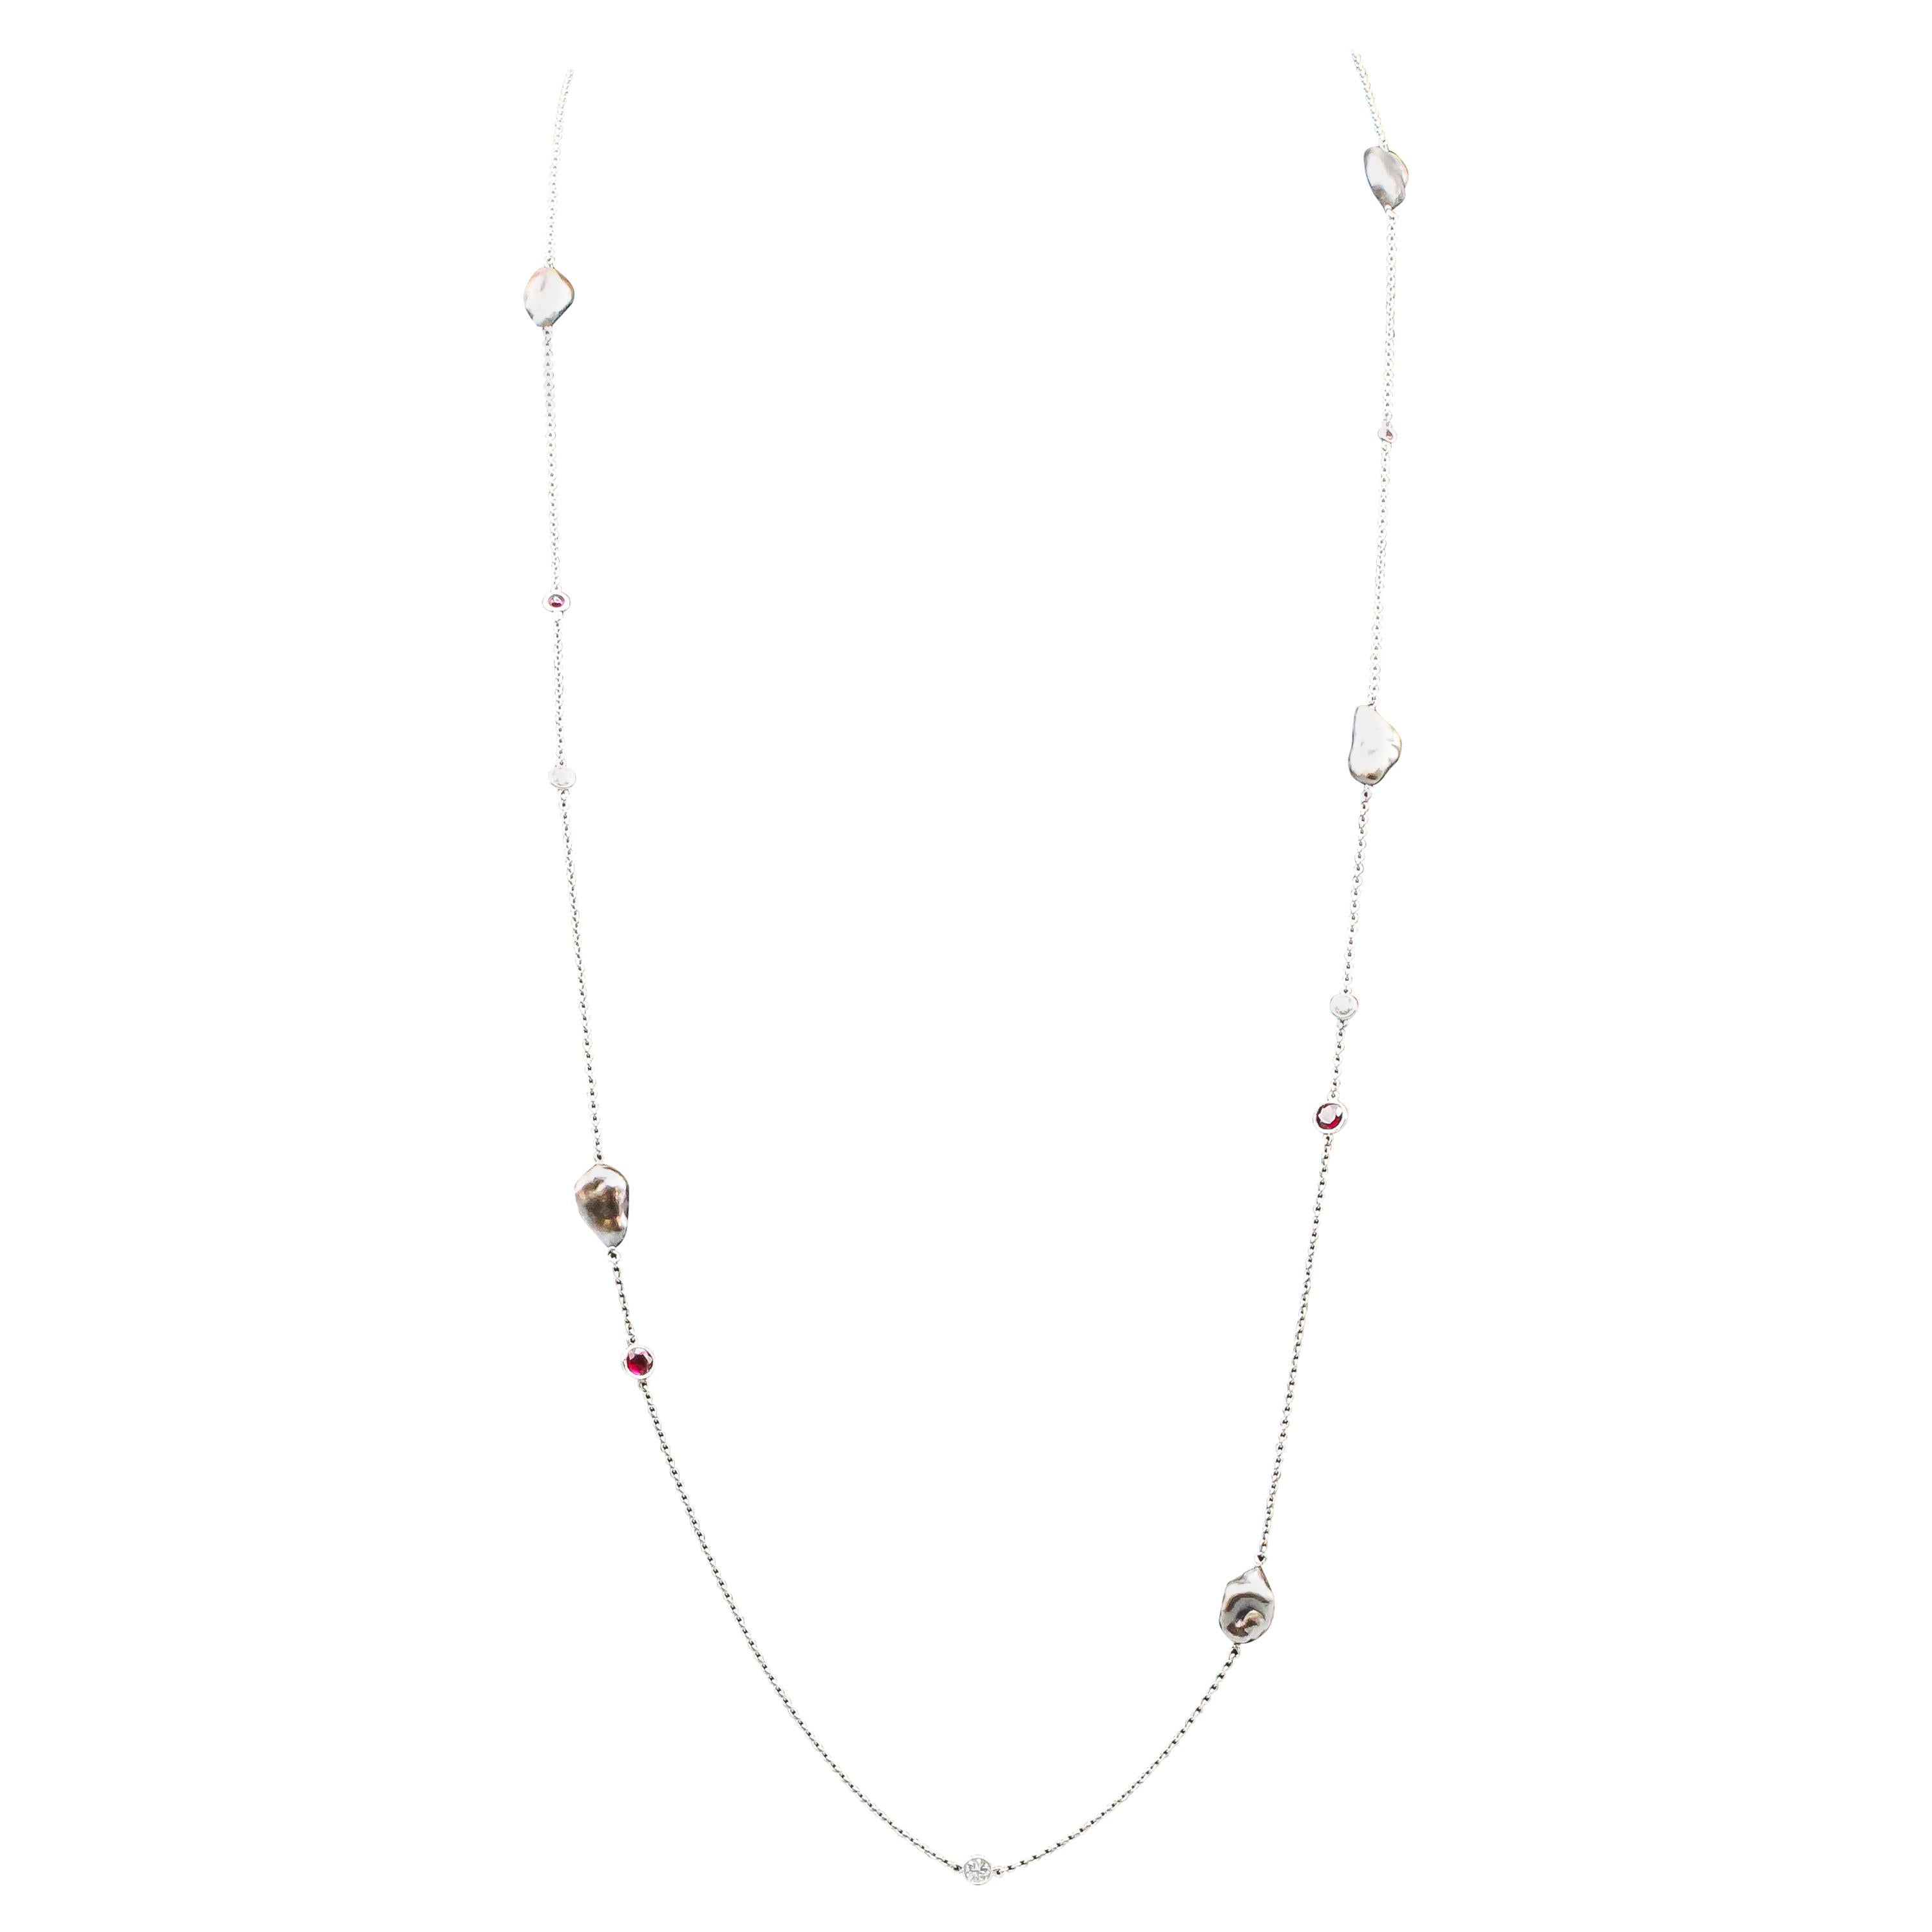 Tiffany & Co. Peretti by Yard Pearl, Diamond, Ruby and Platinum Necklace Chain